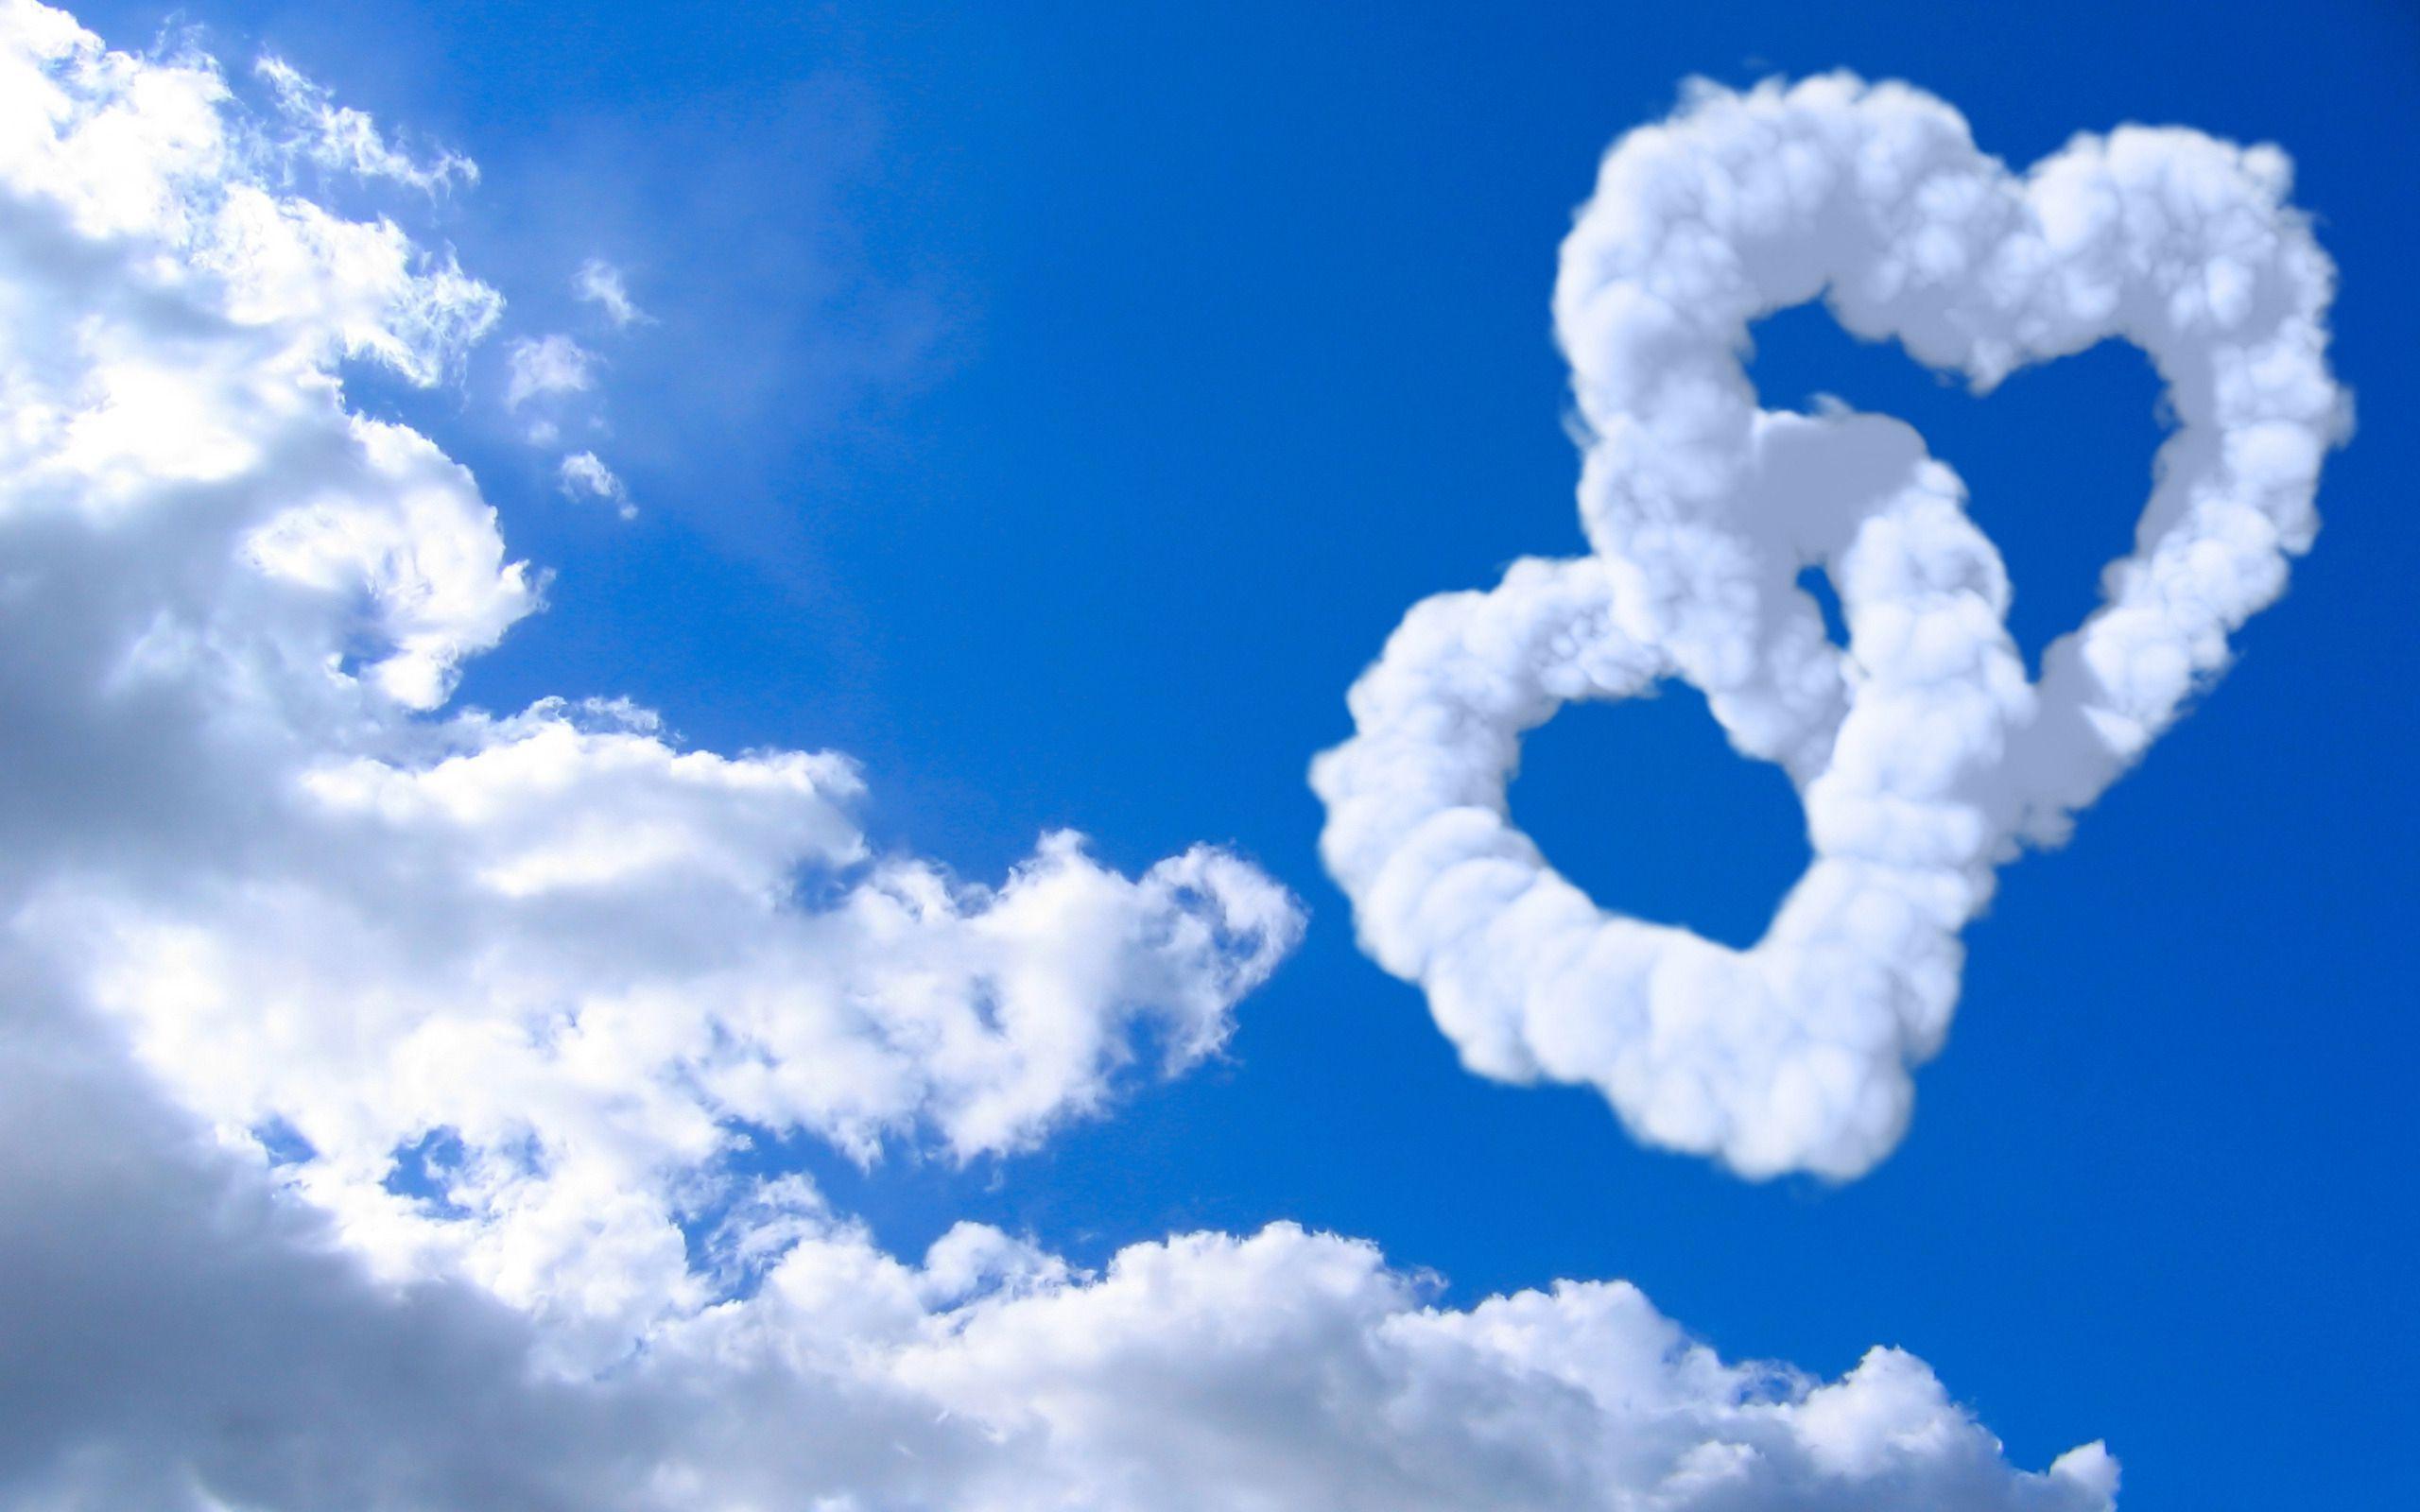 Love Hearts Clouds in Blue Sky Wallpaper and Photo High